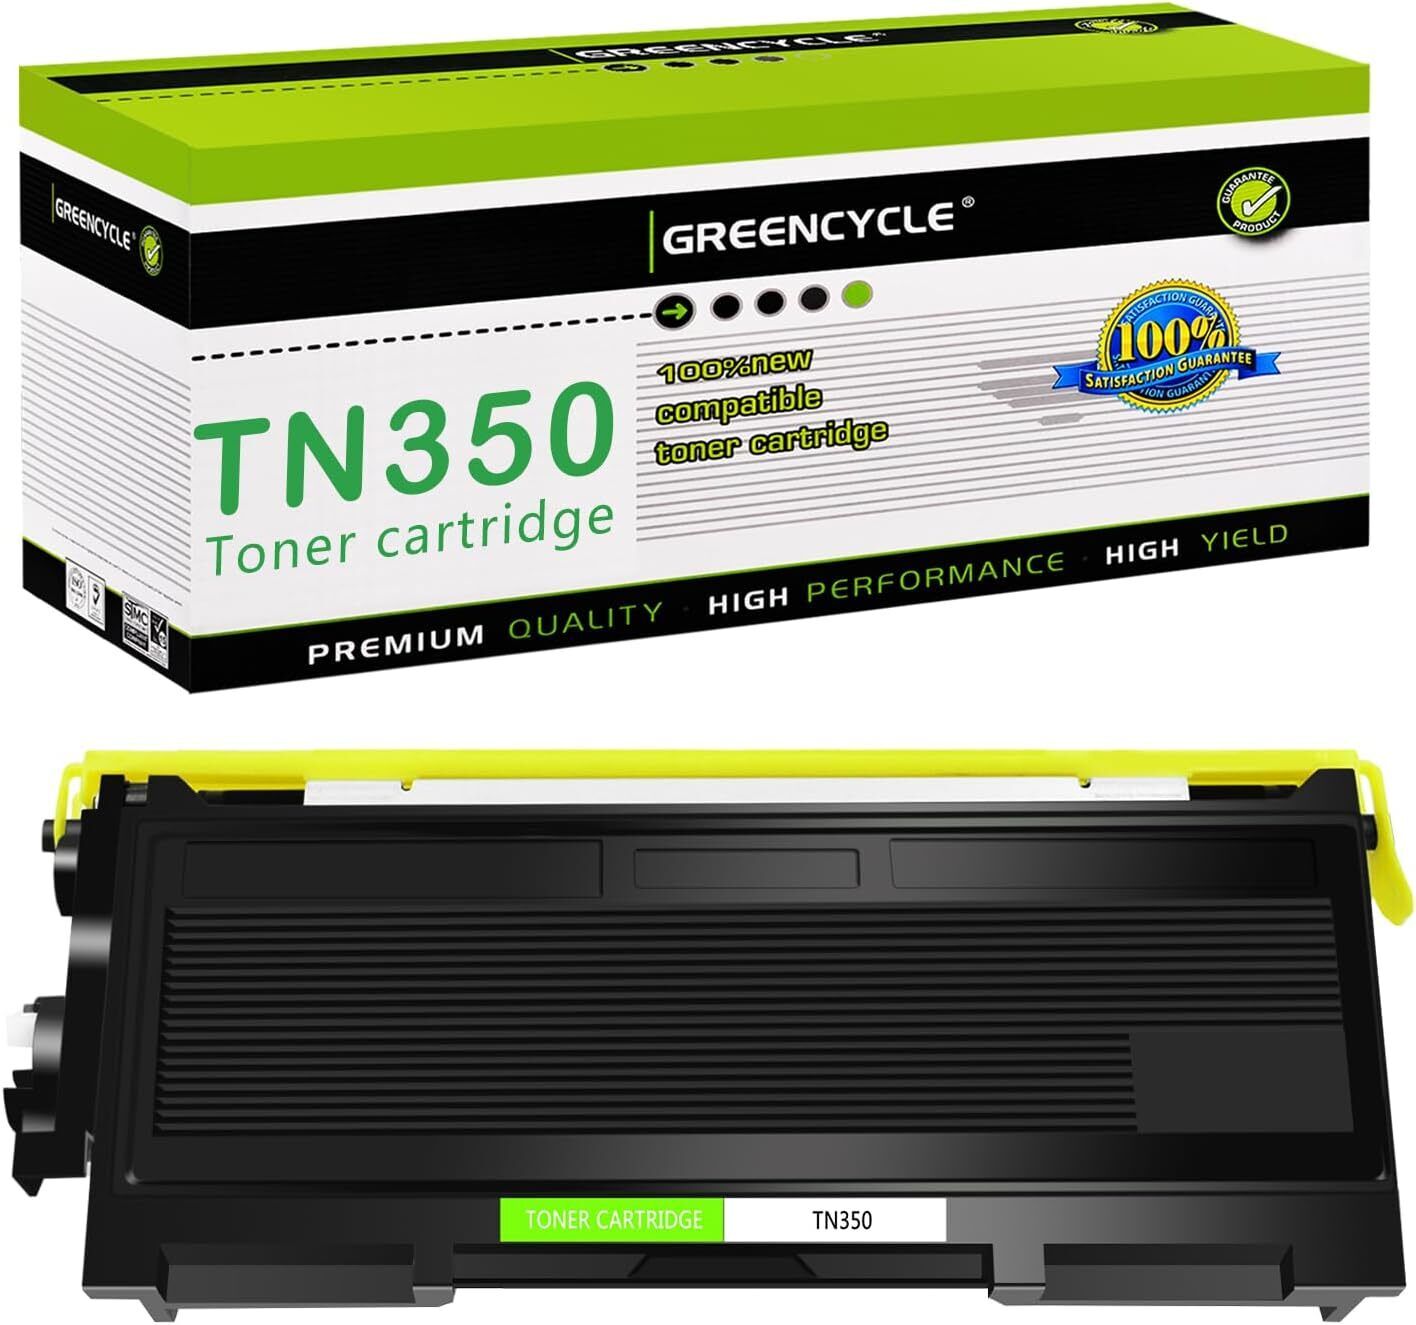 High Yield TN-350 BK Toner Cartridge for Brother DCP-7020 DCP-7025 HL-2030 2040R